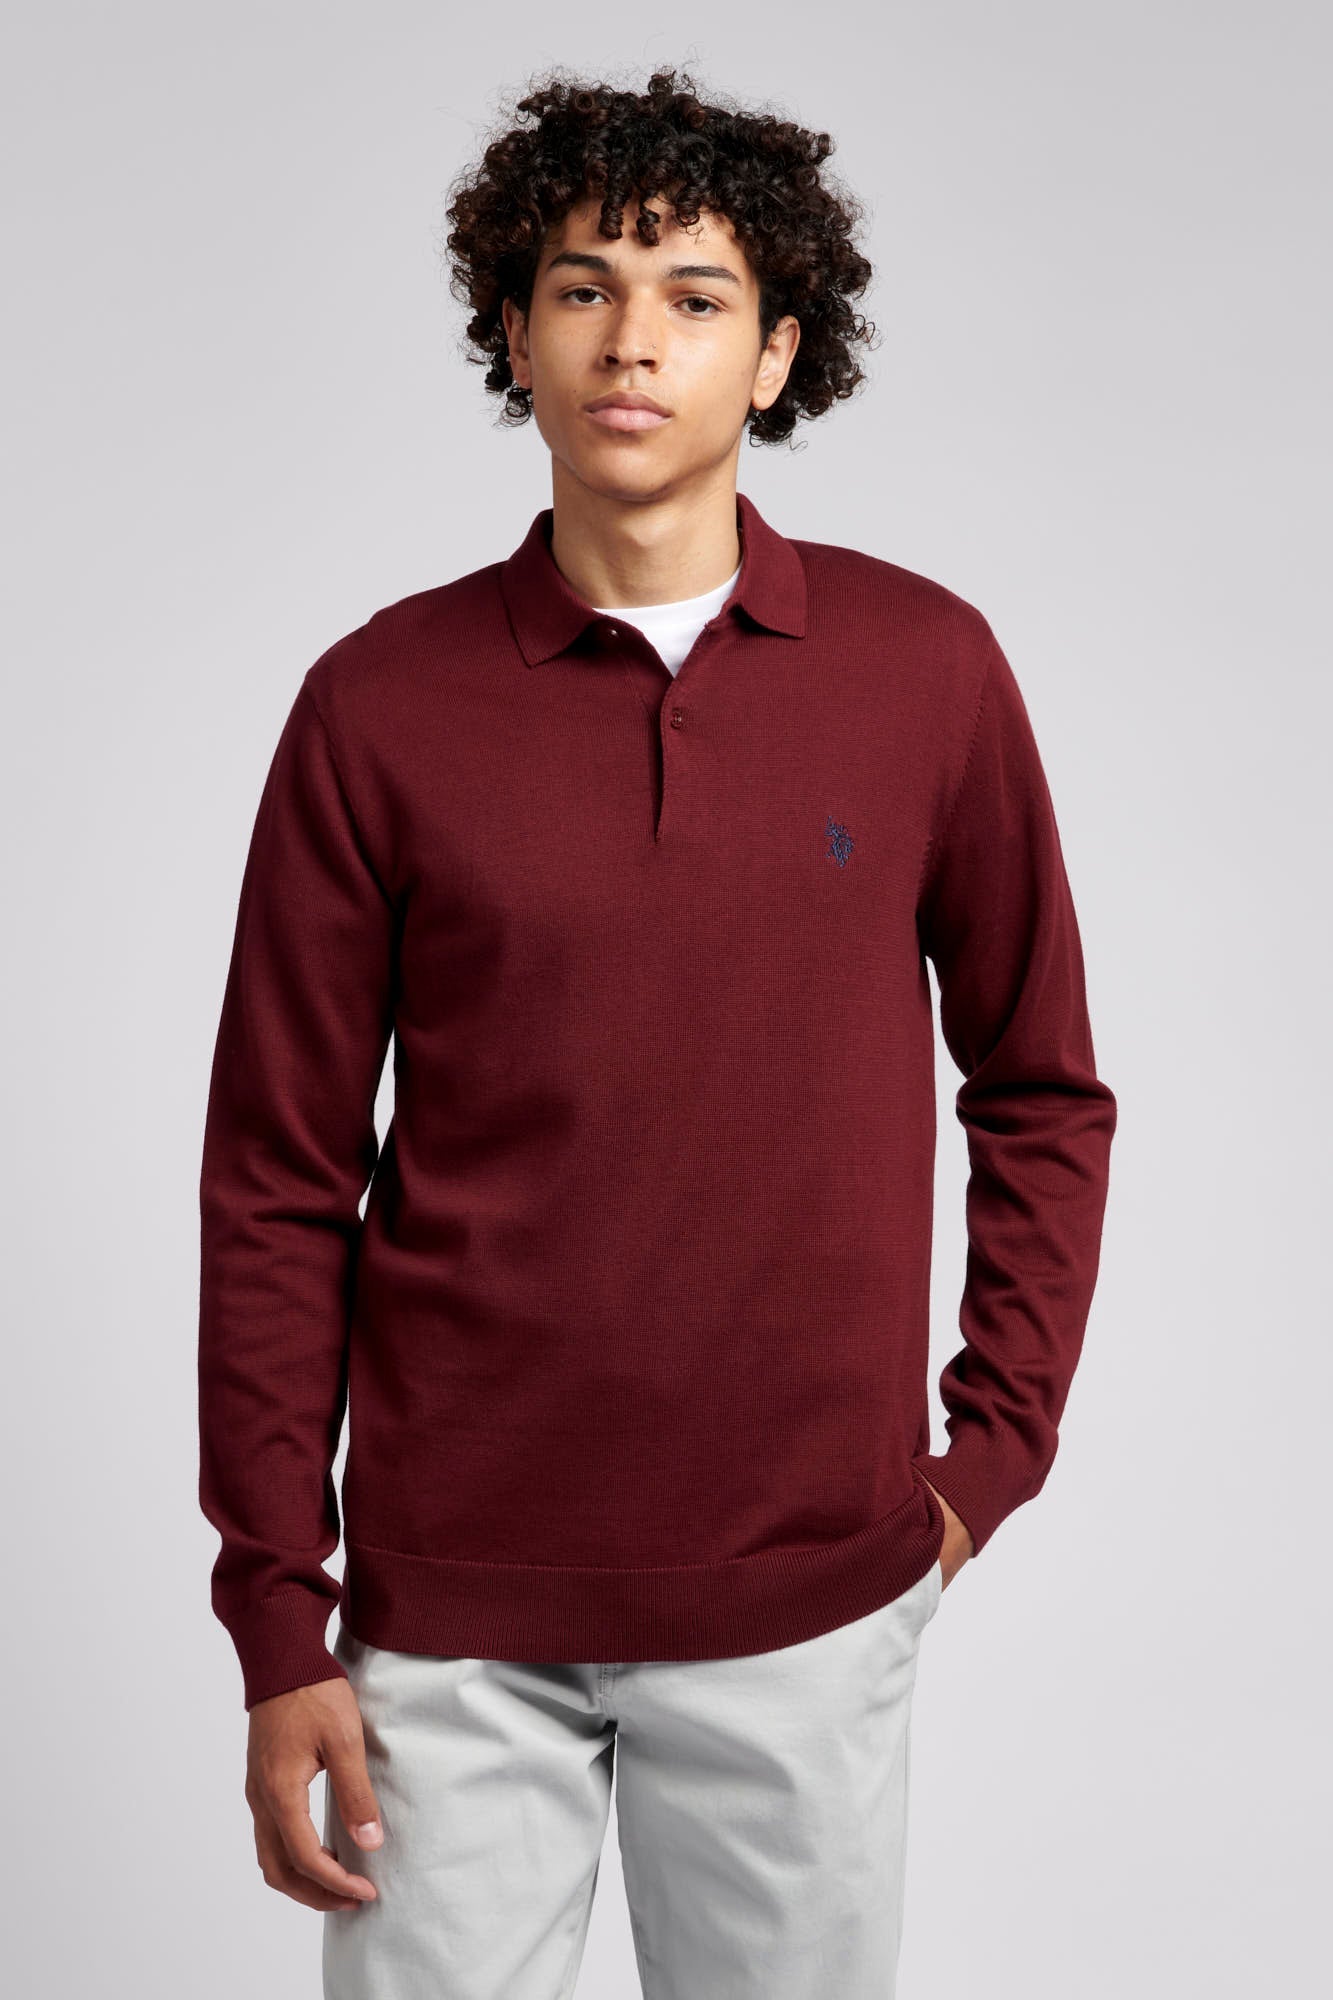 U.S. Polo Assn. Mens Long Sleeve Knitted Polo Shirt in Windsor Wine